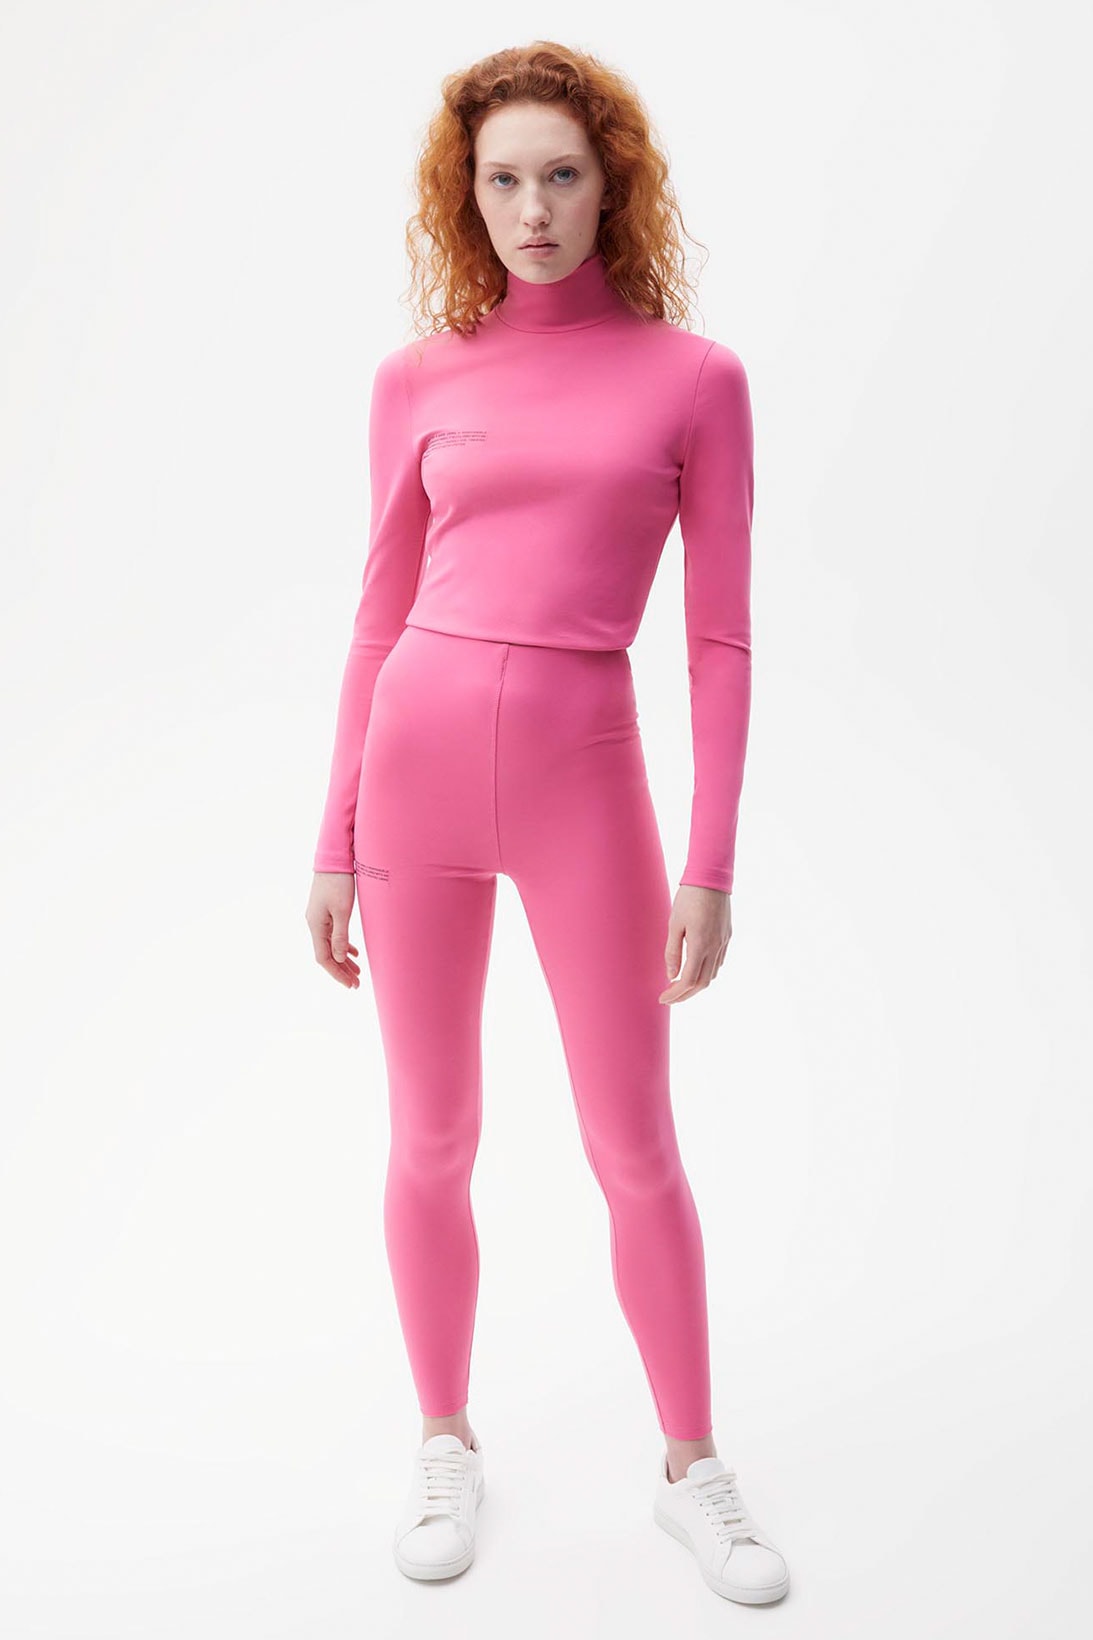 pangaia roica stretch athleisure sustainable collection turtleneck top leggings pink